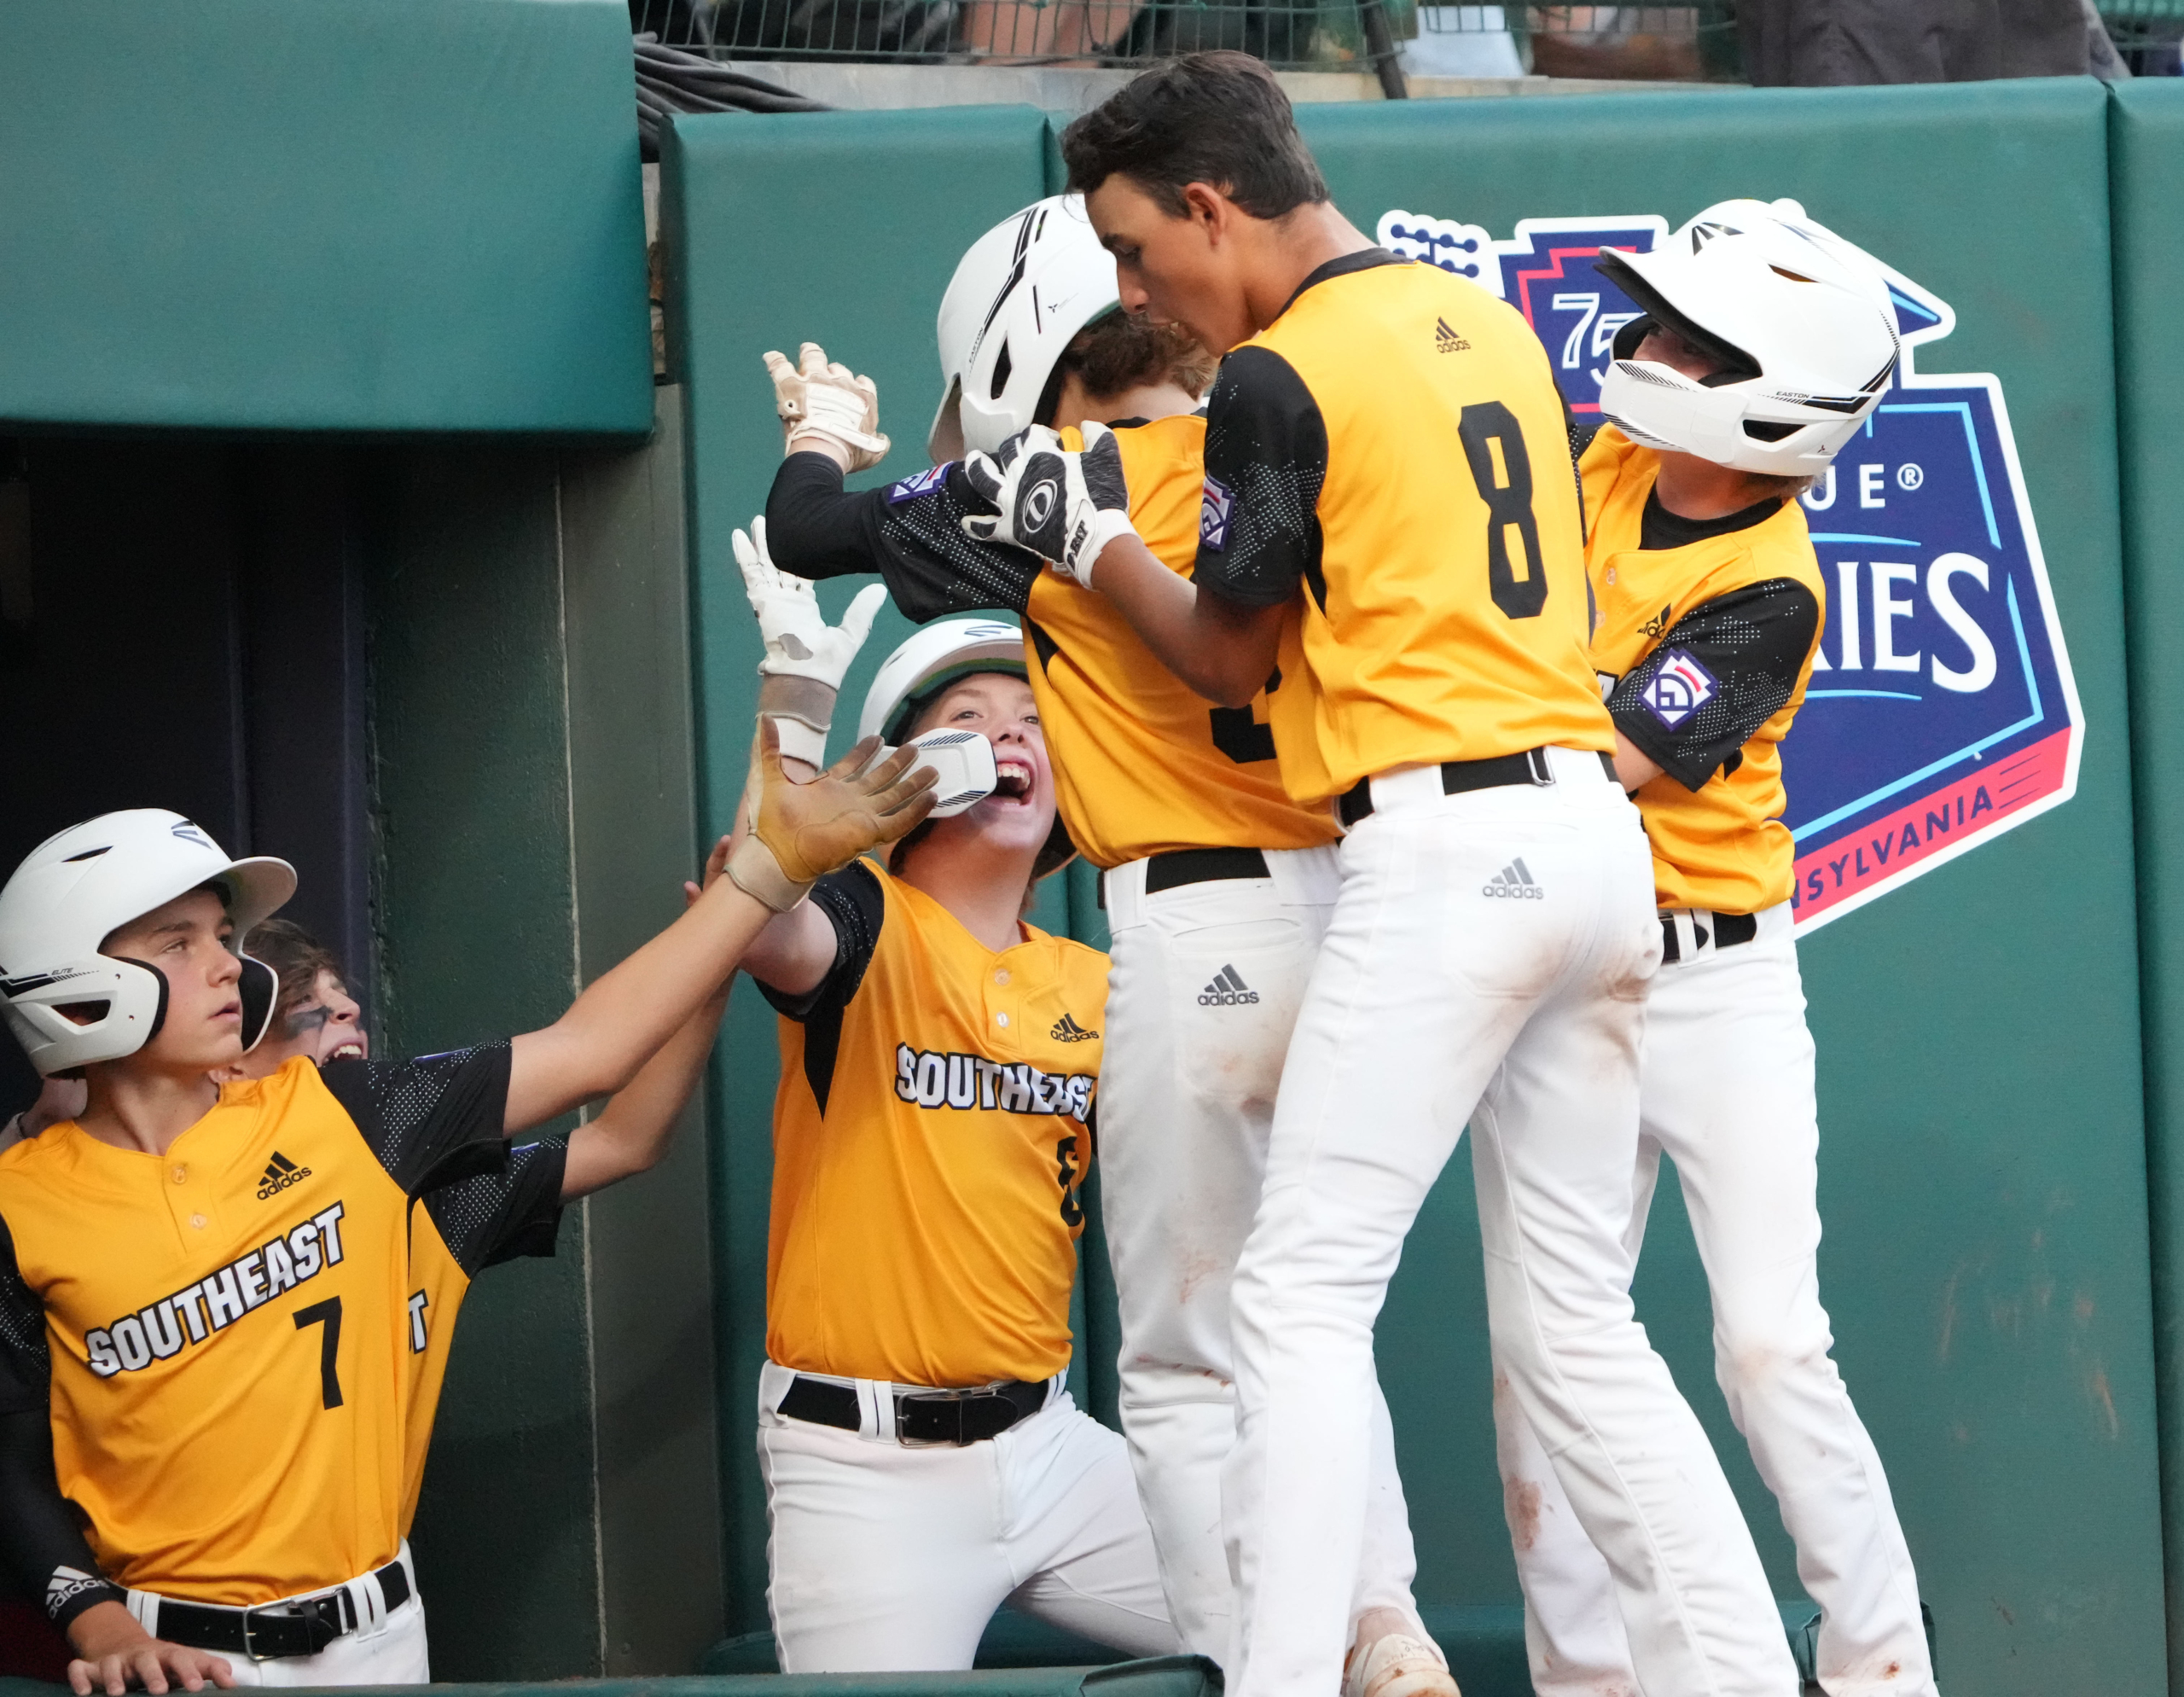 Nolensville Little League wins over Texas, in LLWS United States Final